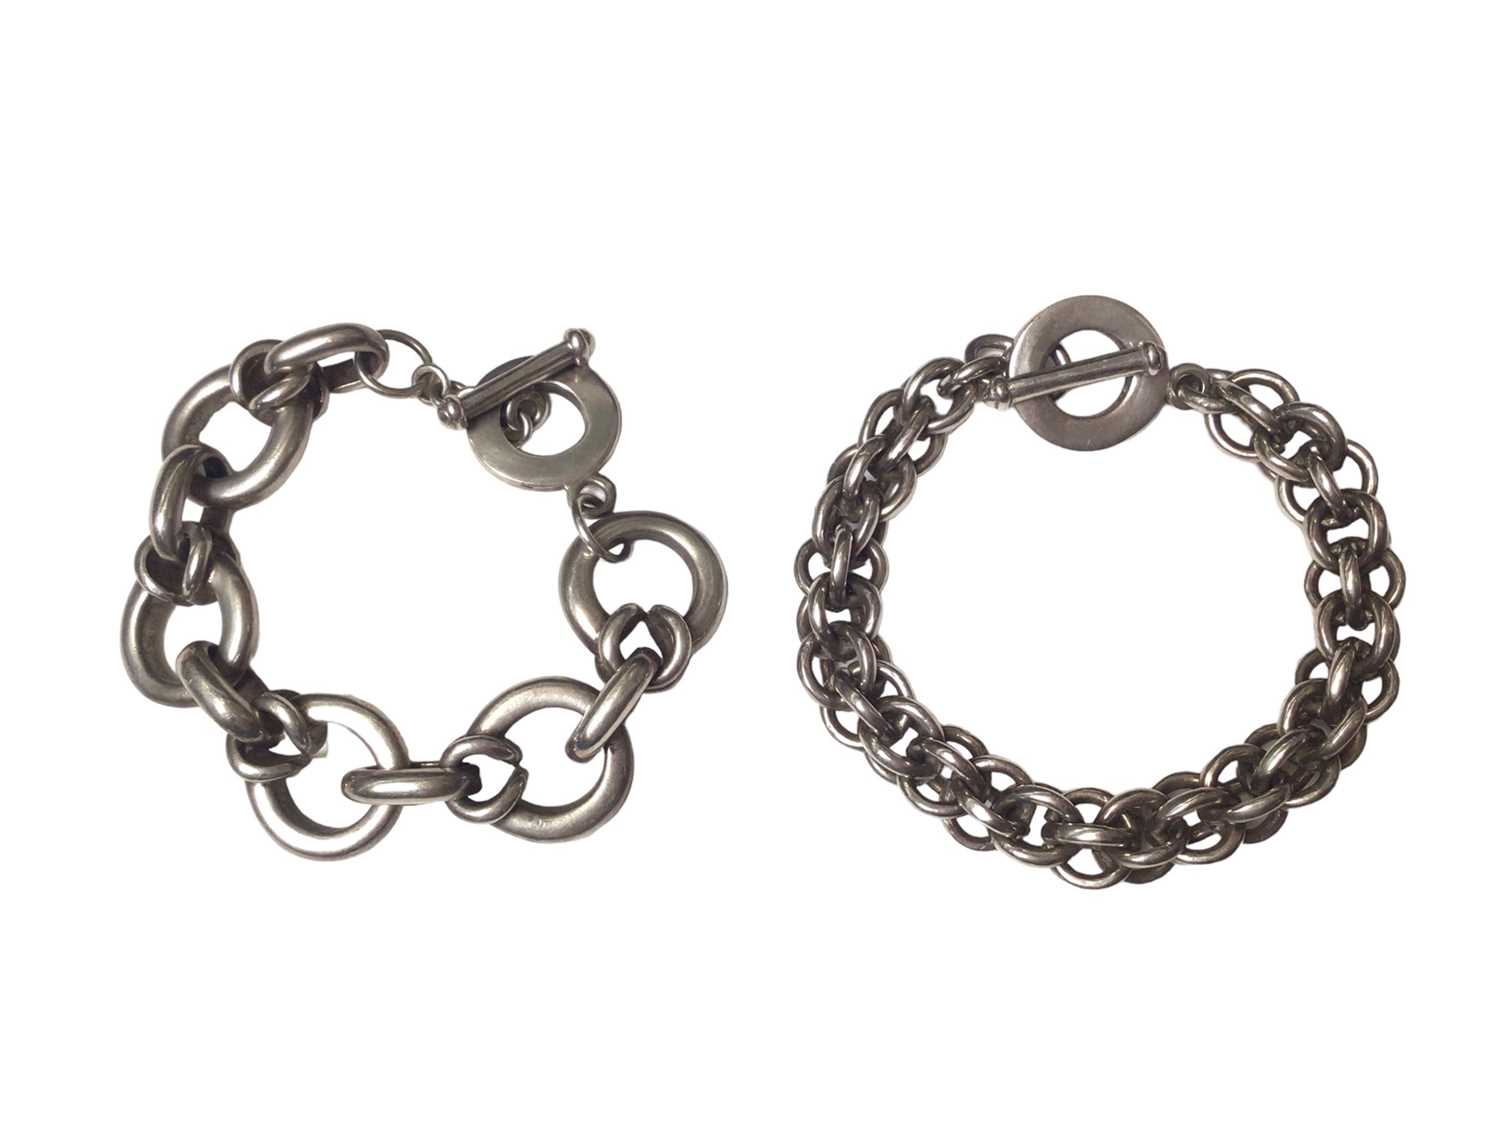 Two contemporary silver link bracelets, both with T-bar fittings